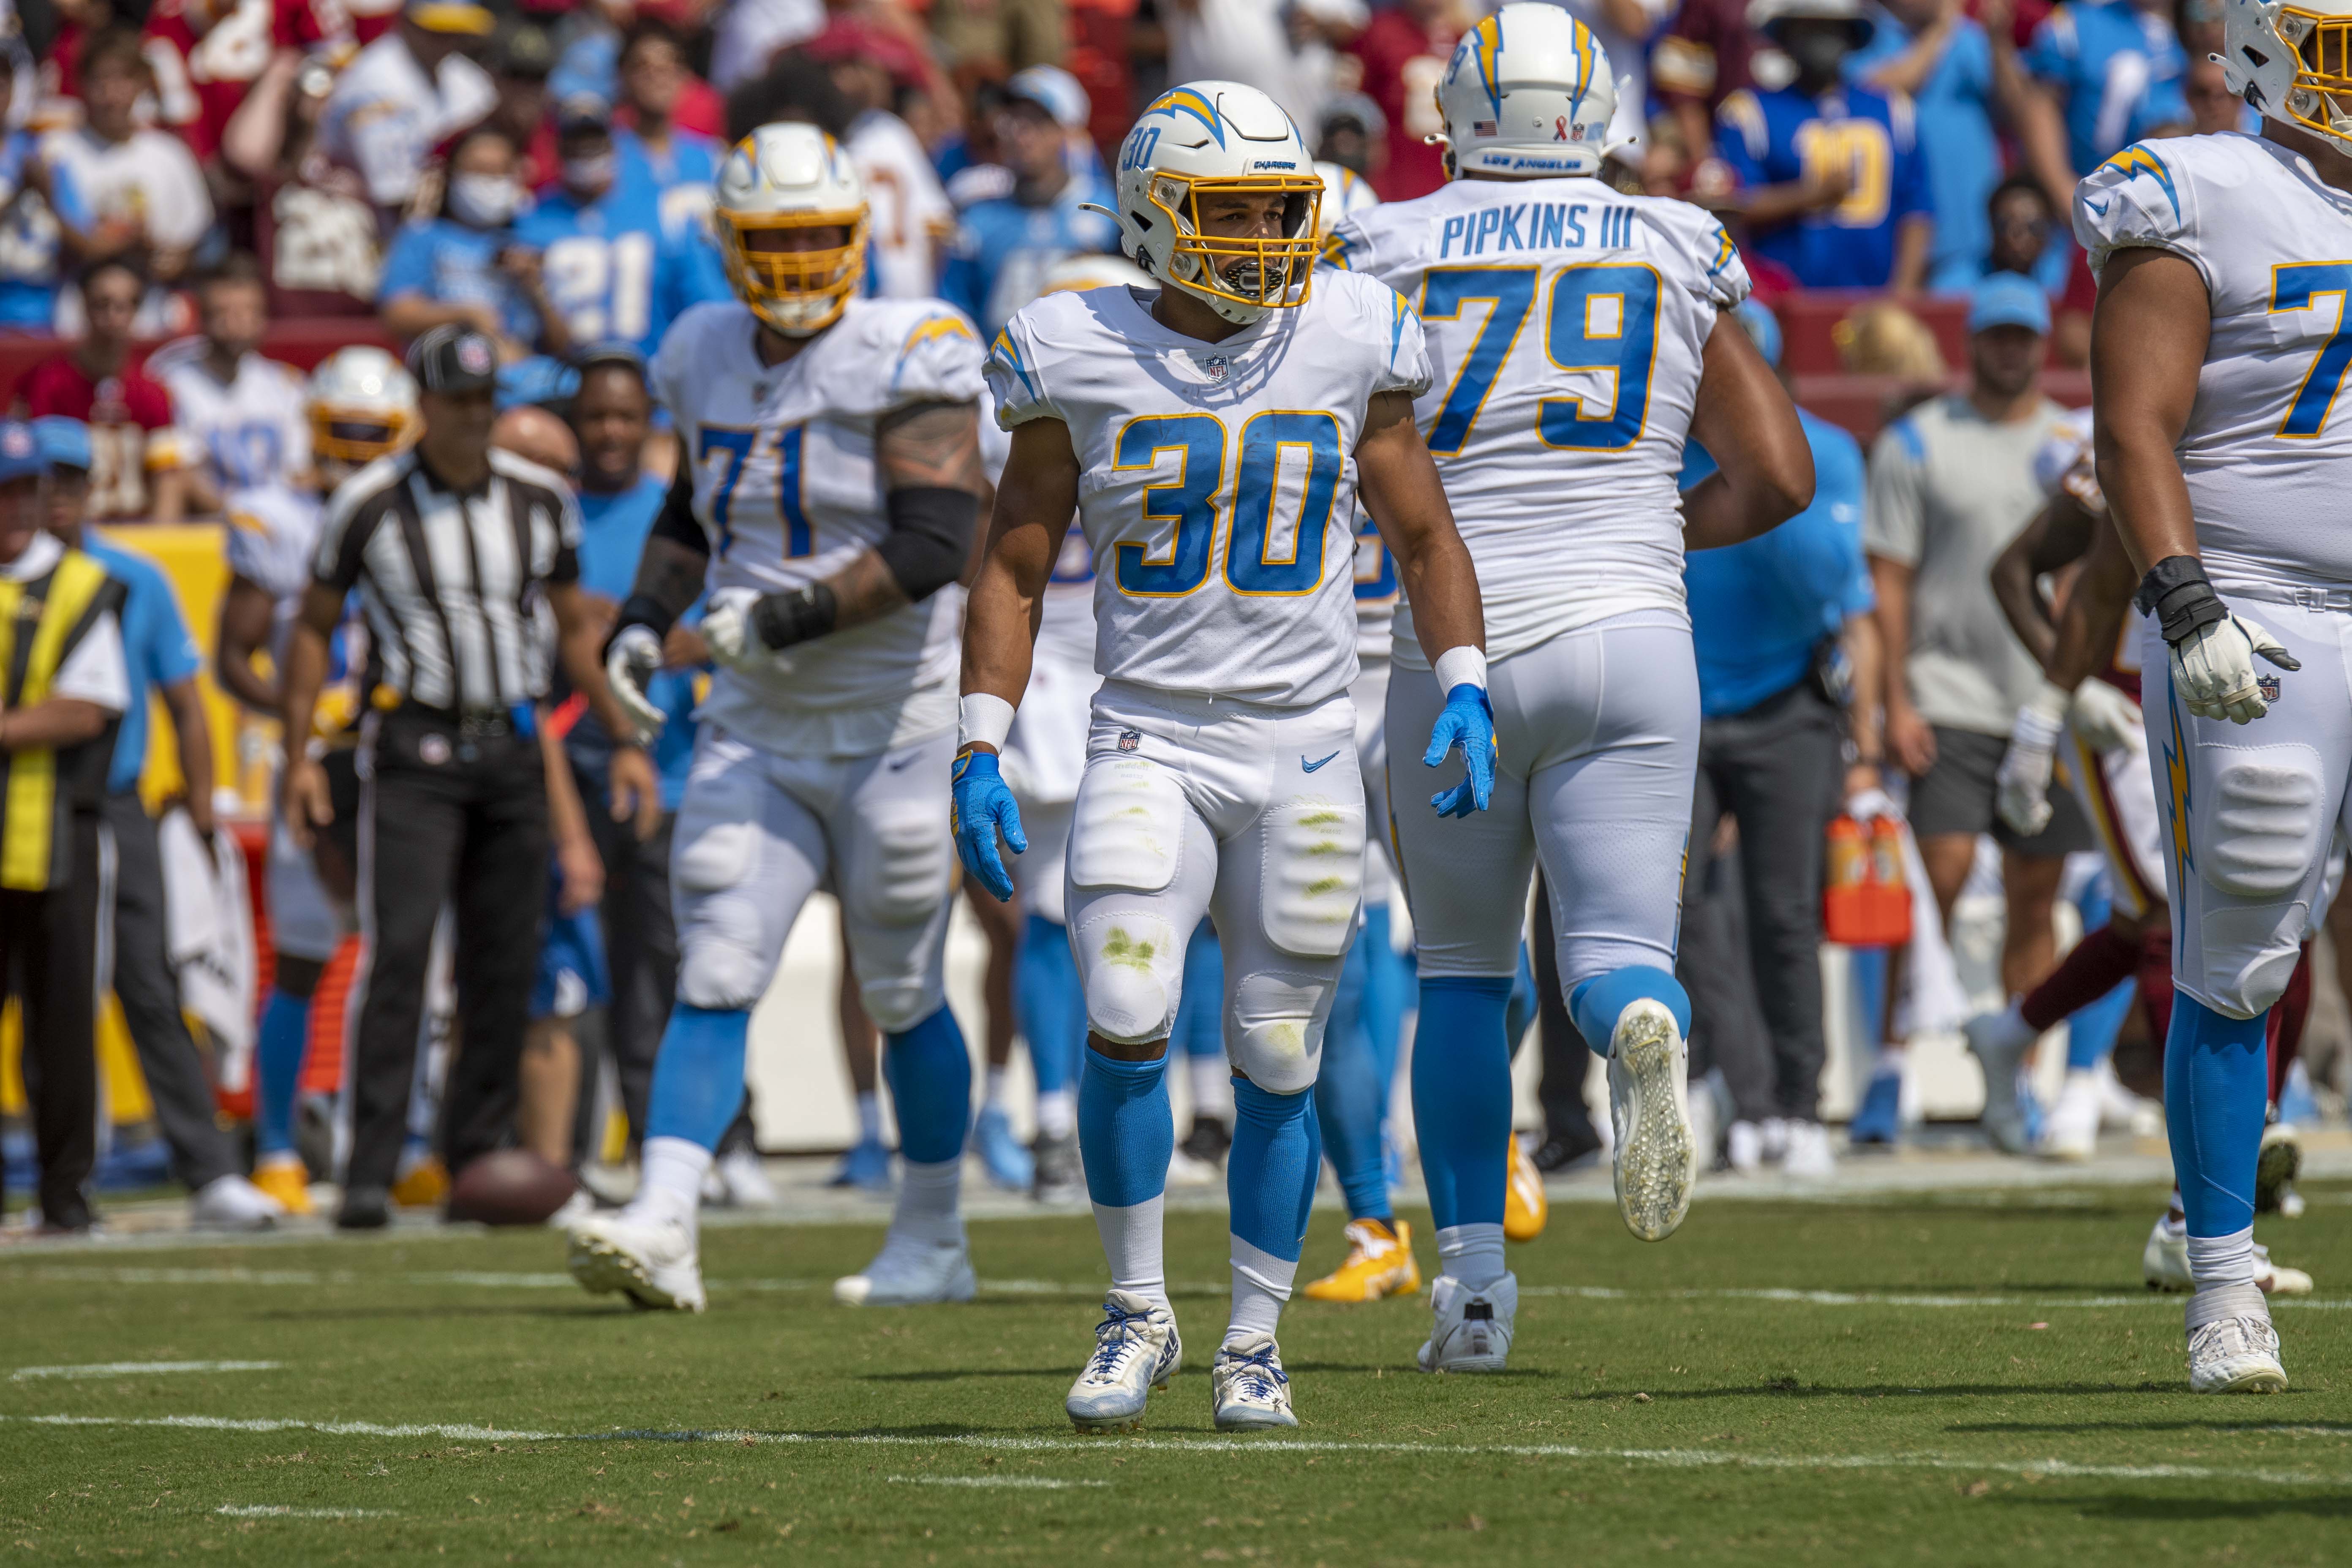 CHARGERS: L.A. falls to 2-3 on Monday Night Football – Annenberg Media